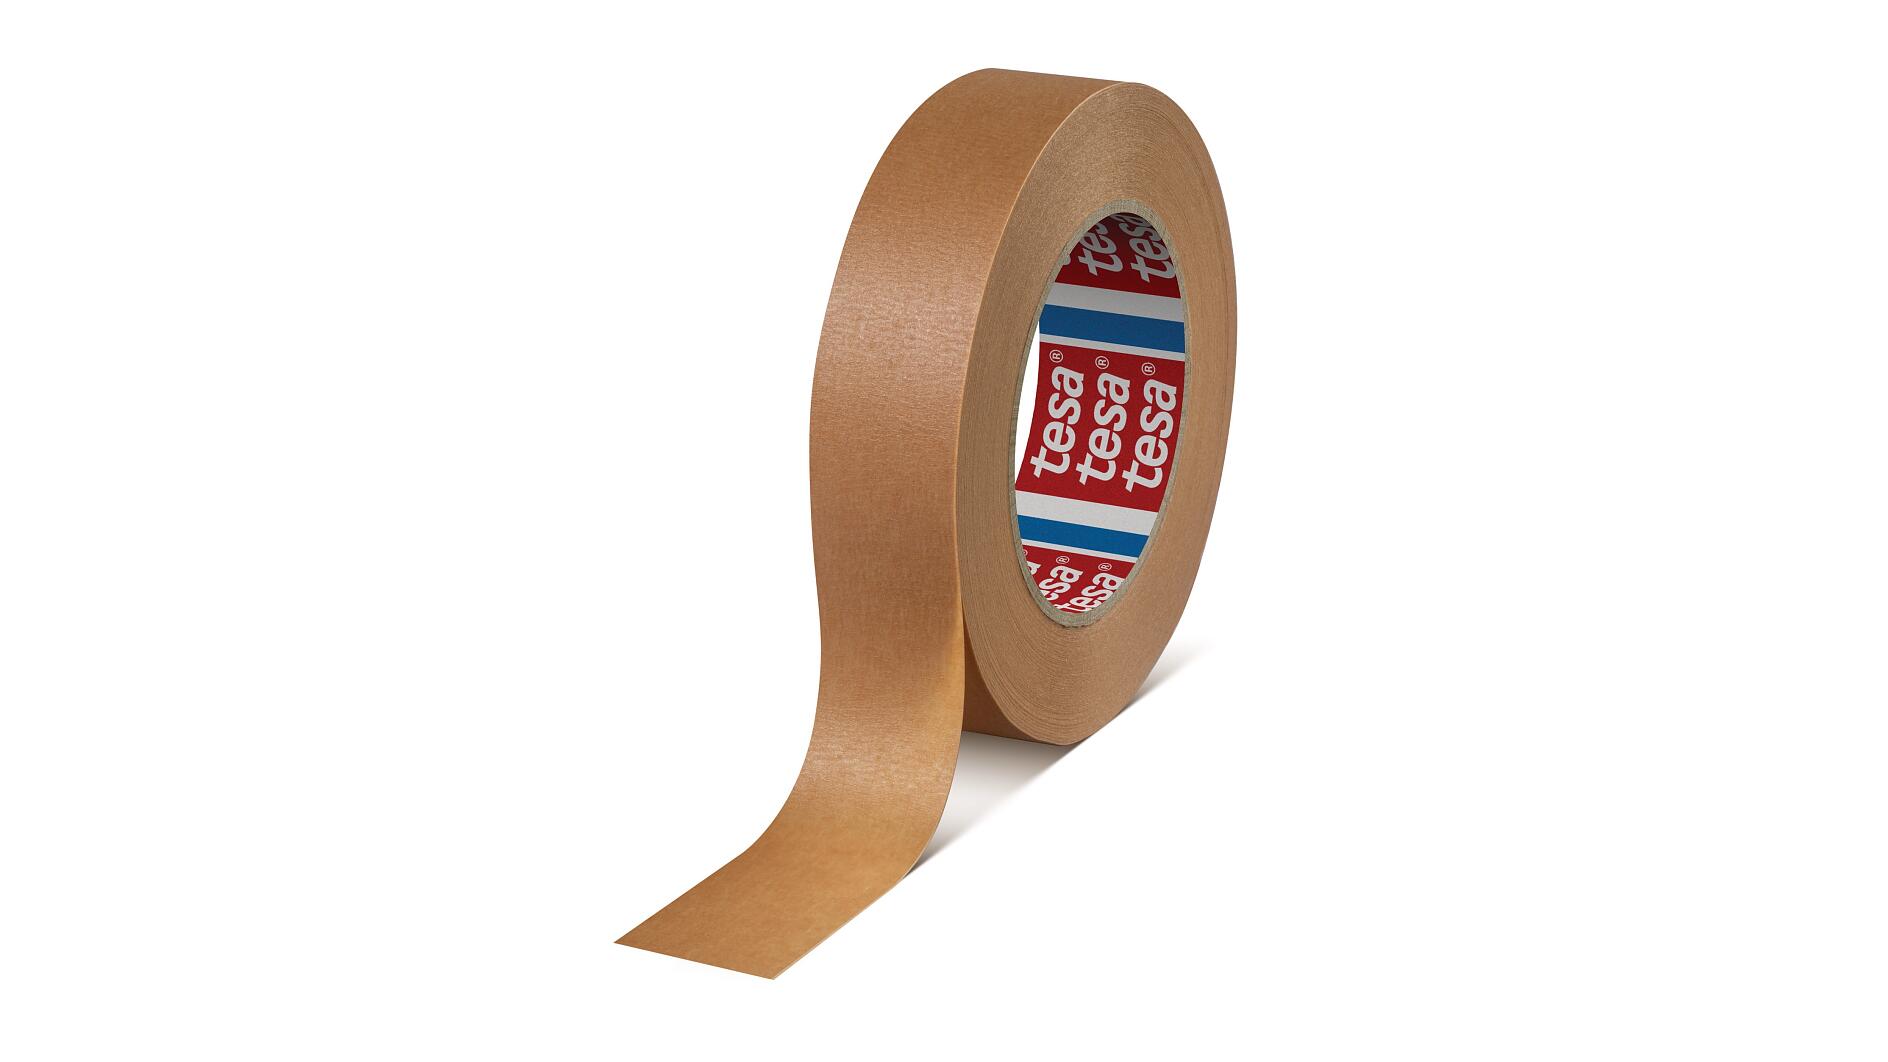 News - Several common problems with masking tape